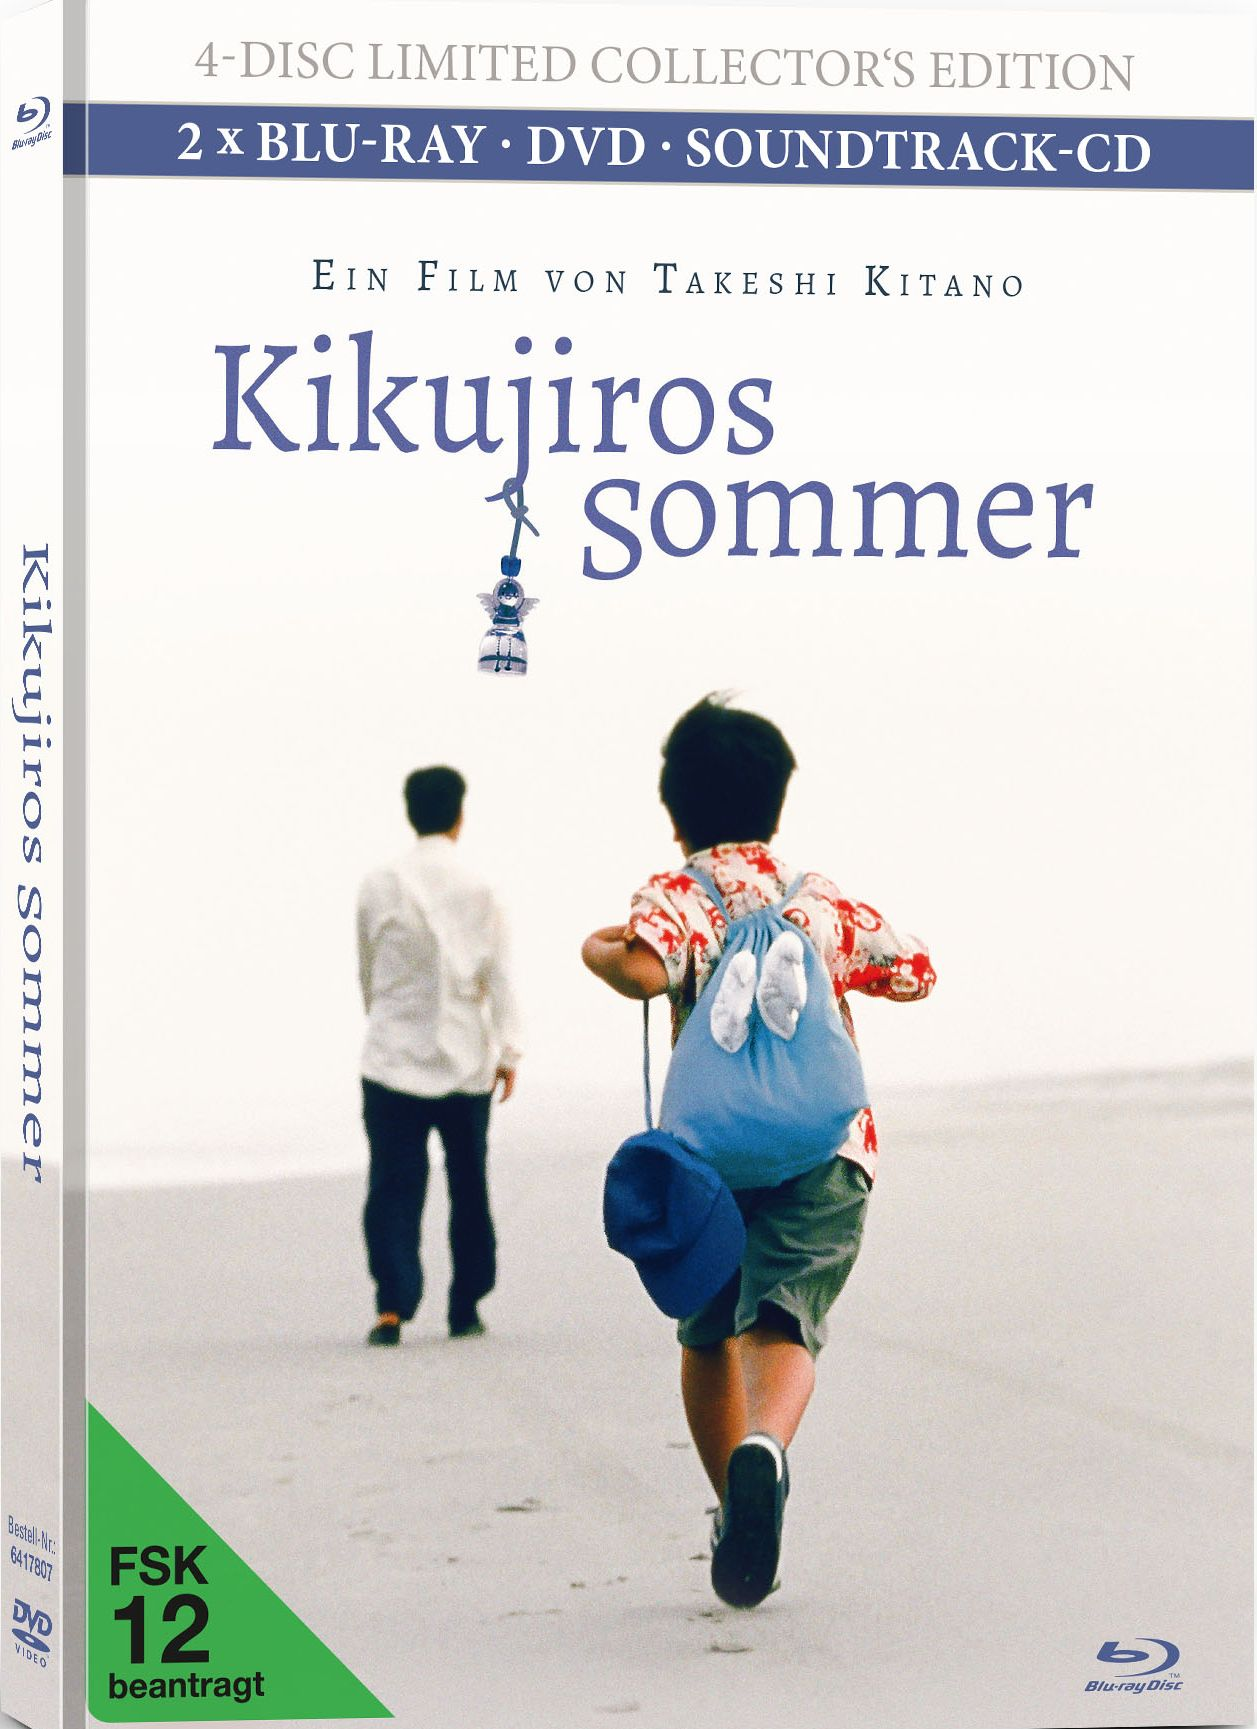 Kikujiros Sommer (4-Disc DVD + Limited Collector’s Soundtrack-CD) inkl. Edition Blu-ray